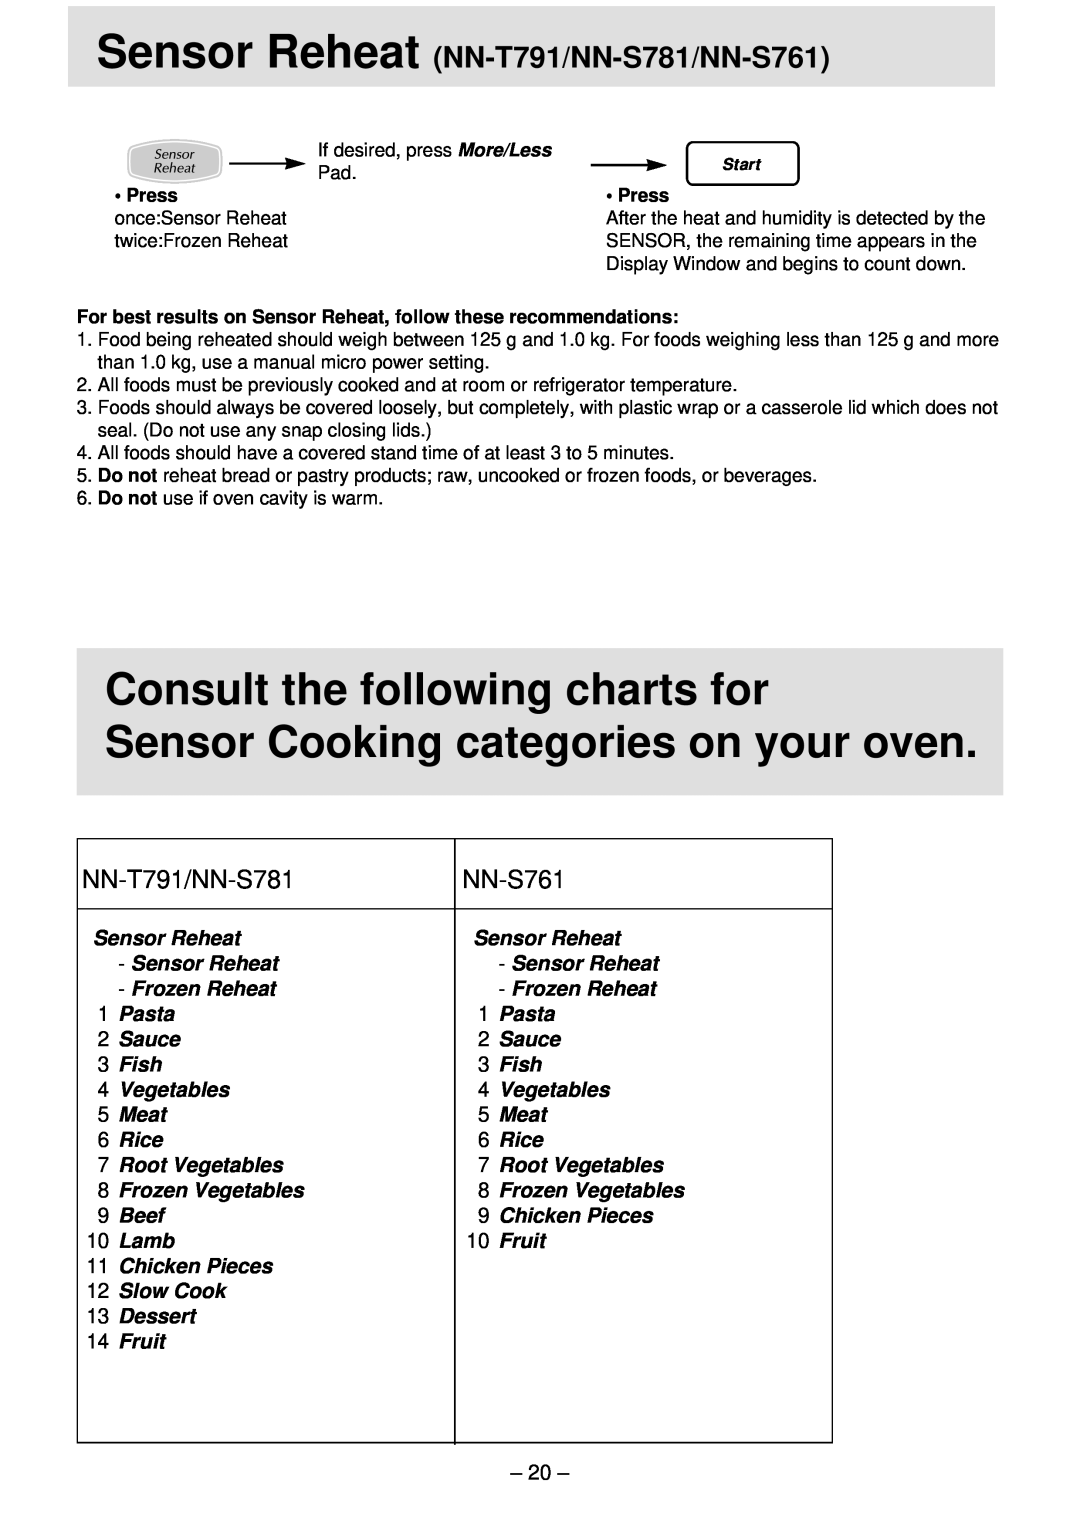 Panasonic NN-S761 Sensor Reheat, Consult the following charts for, Sensor Cooking categories on your oven, NN-T791/NN-S781 